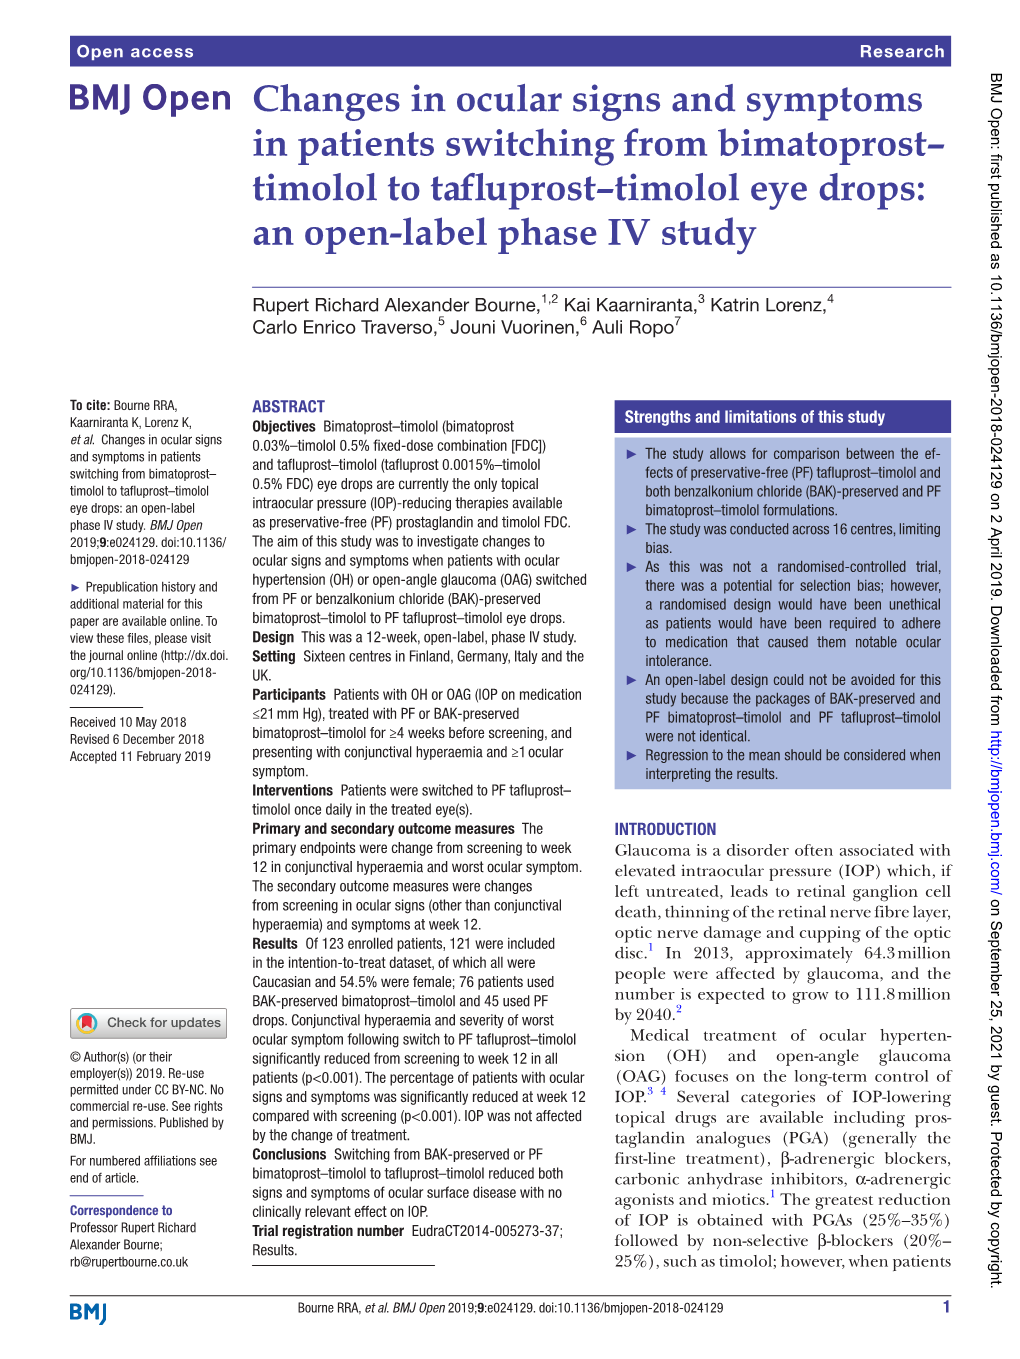 Anges in Ocular Signs and Symptoms in Patients Switching from Bimatoprost– Timolol to Tafluprost–Timolol Eye Drops: an Open-Label Phase IV Study